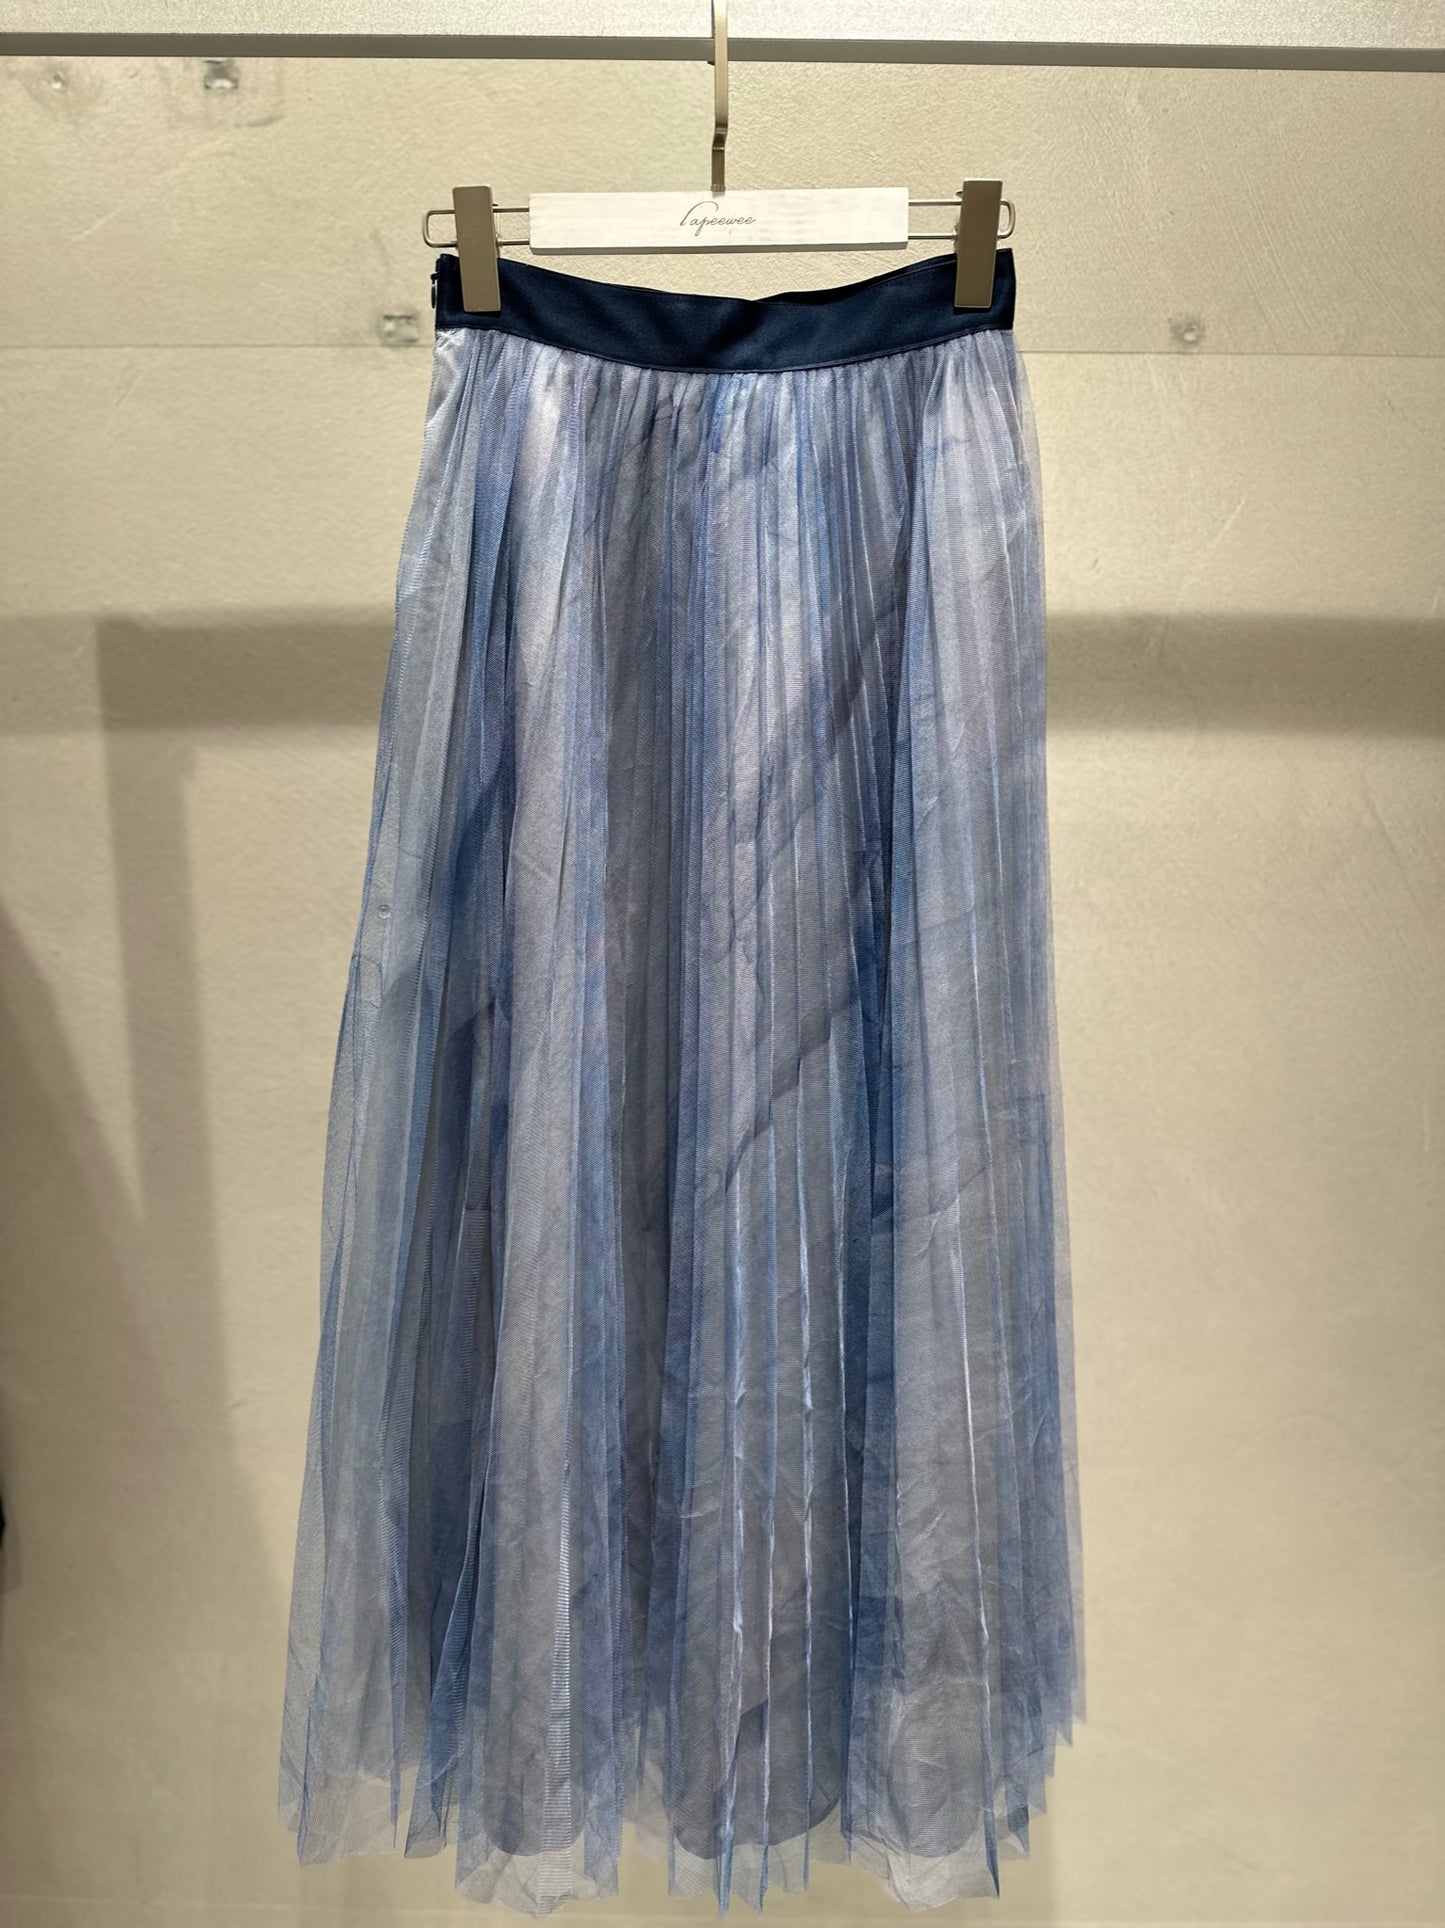 Printed Blue Skirt -Size S